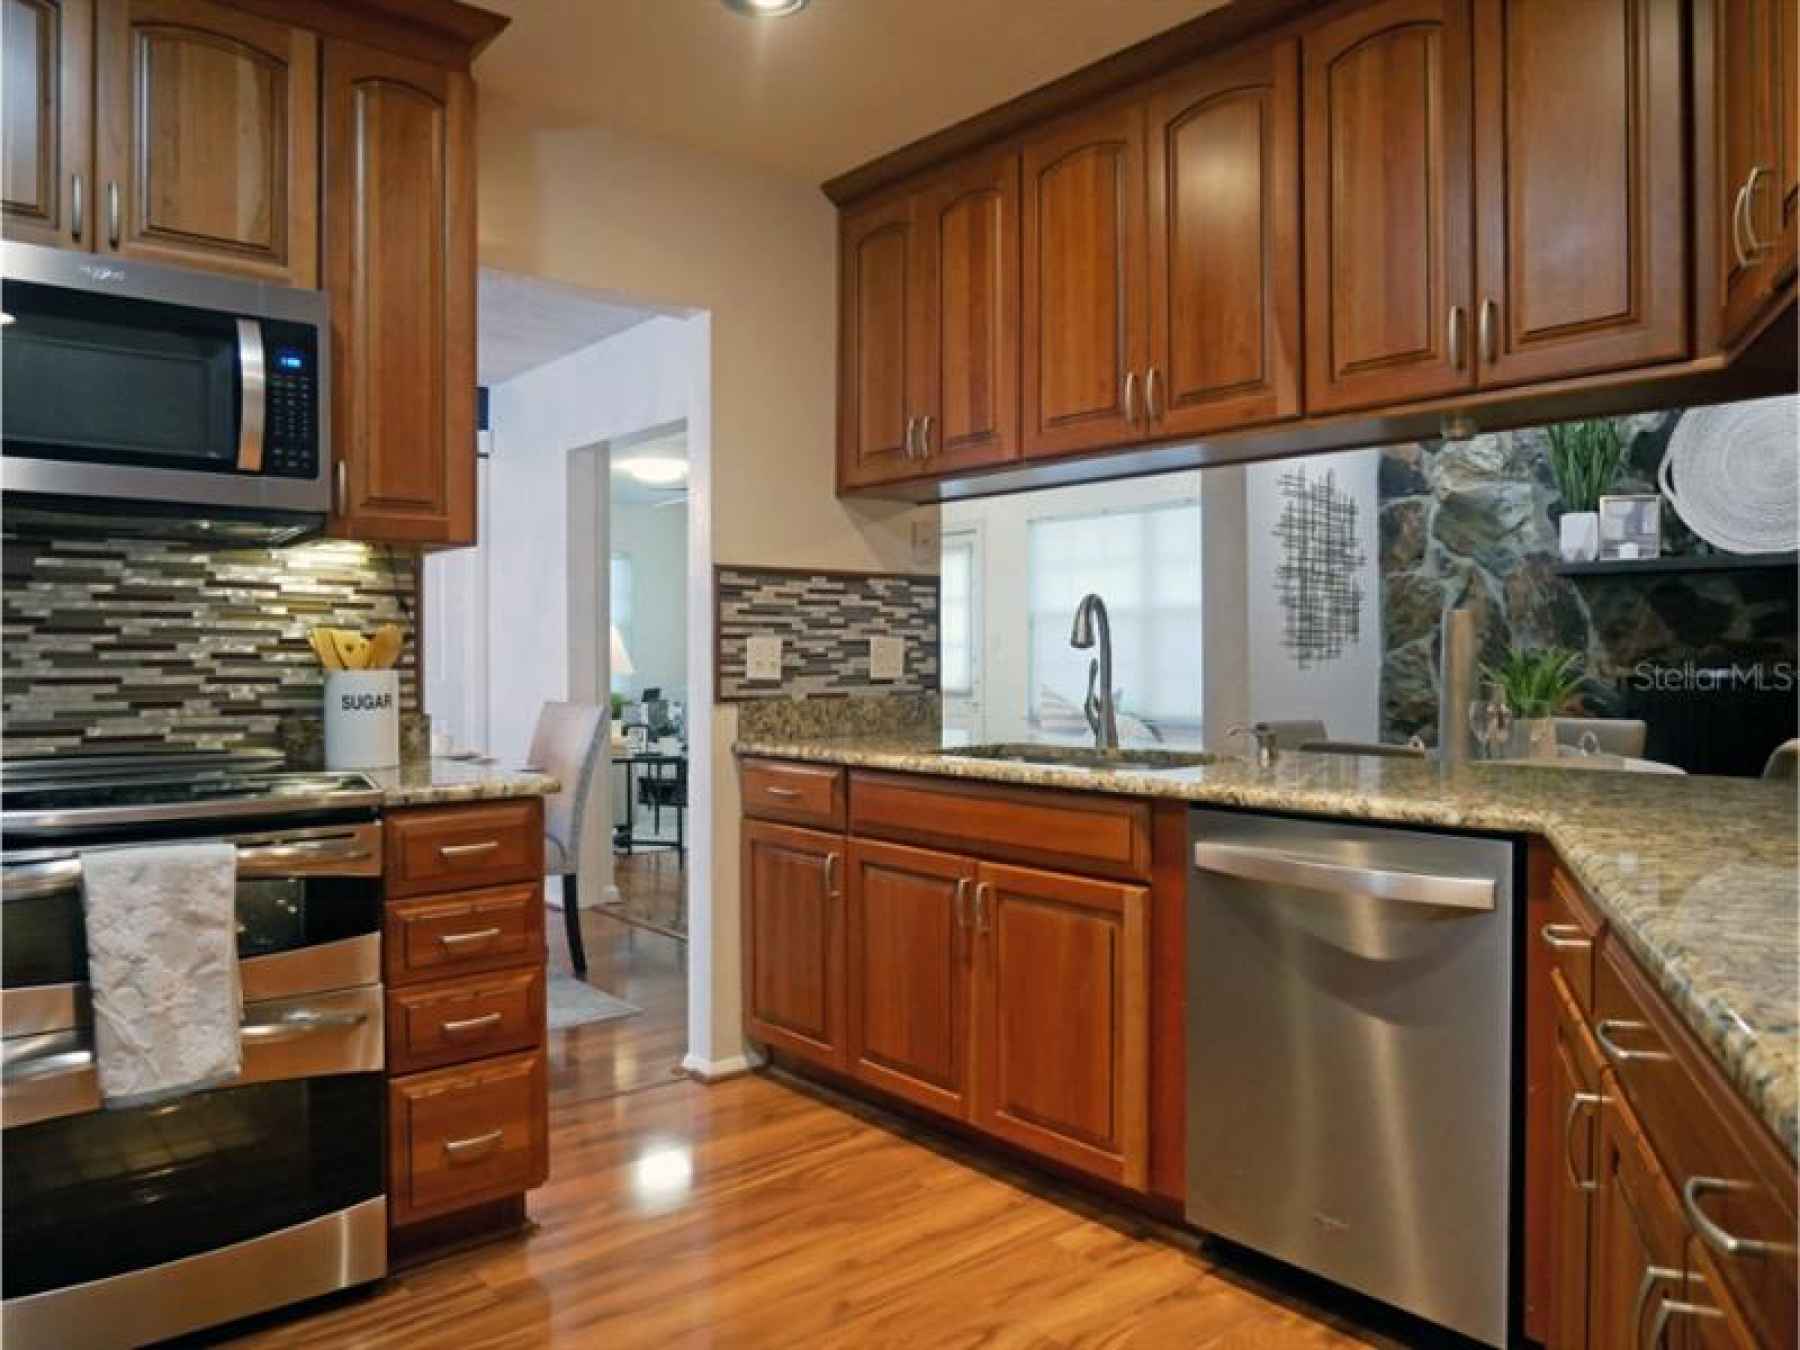 Kitchen, over looking the fireplace, higher end Stainless appliances, except the refrigerator